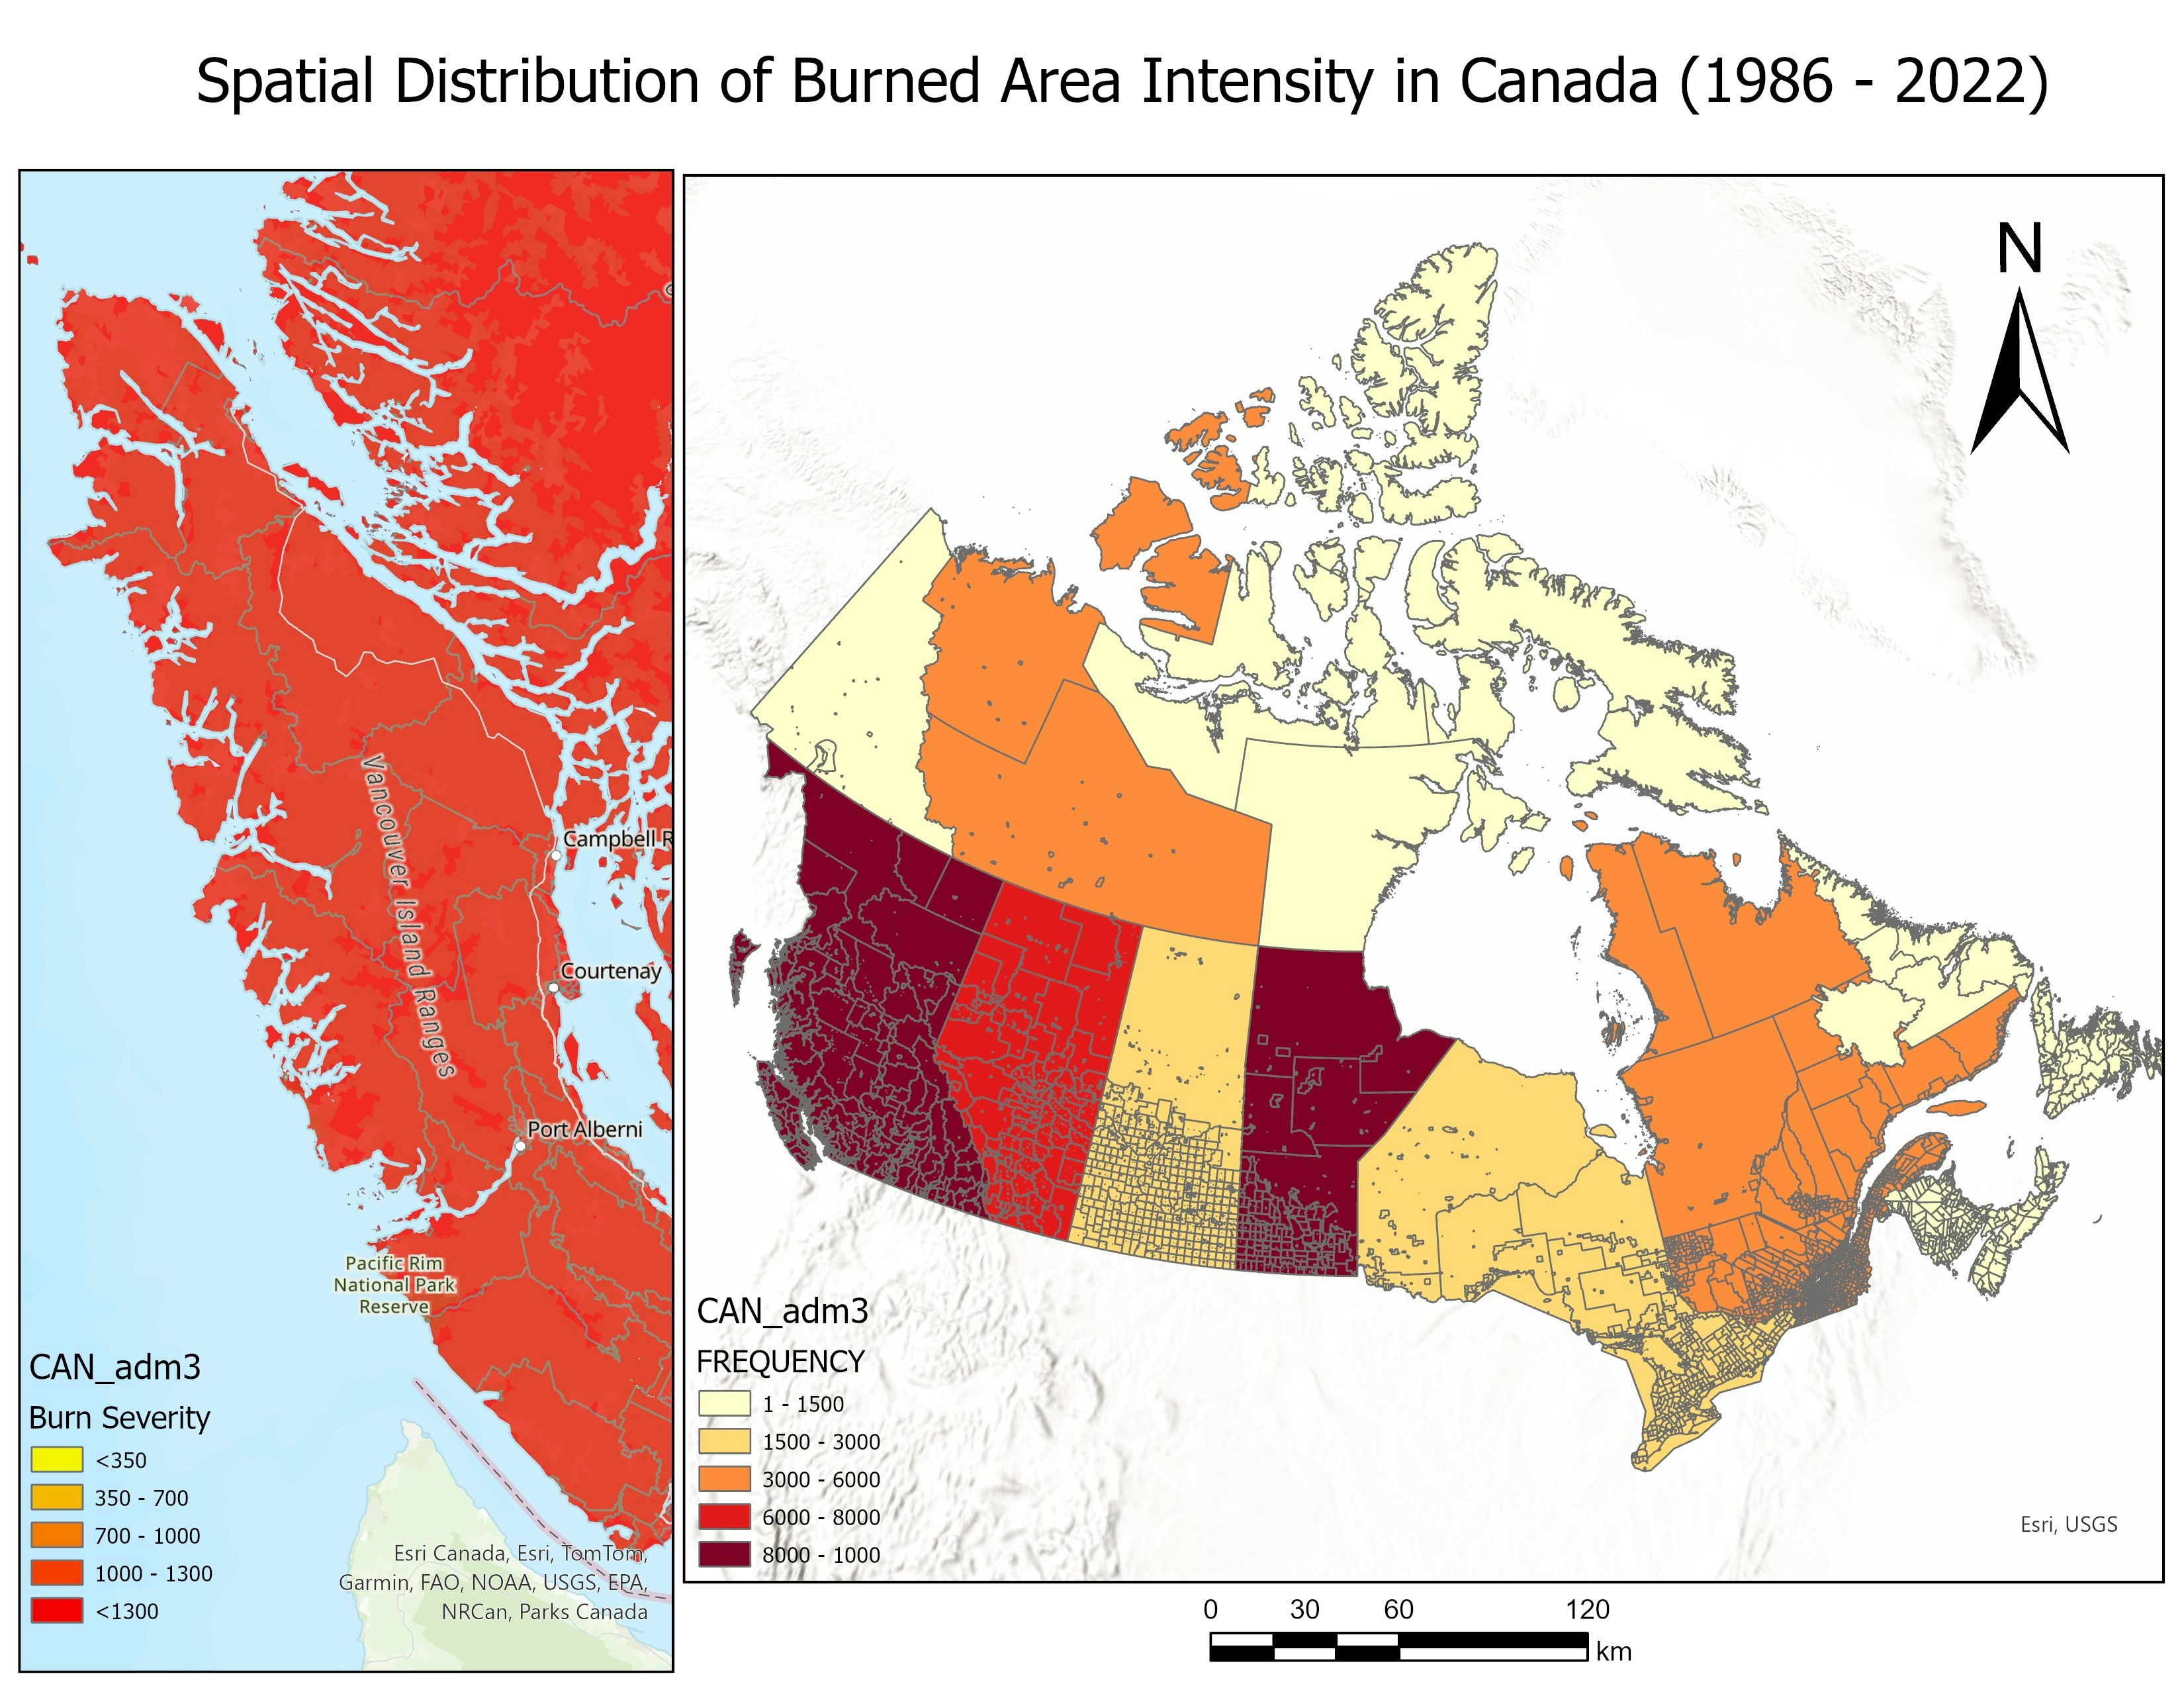 Spatial Distribution of Wildfire- Canada